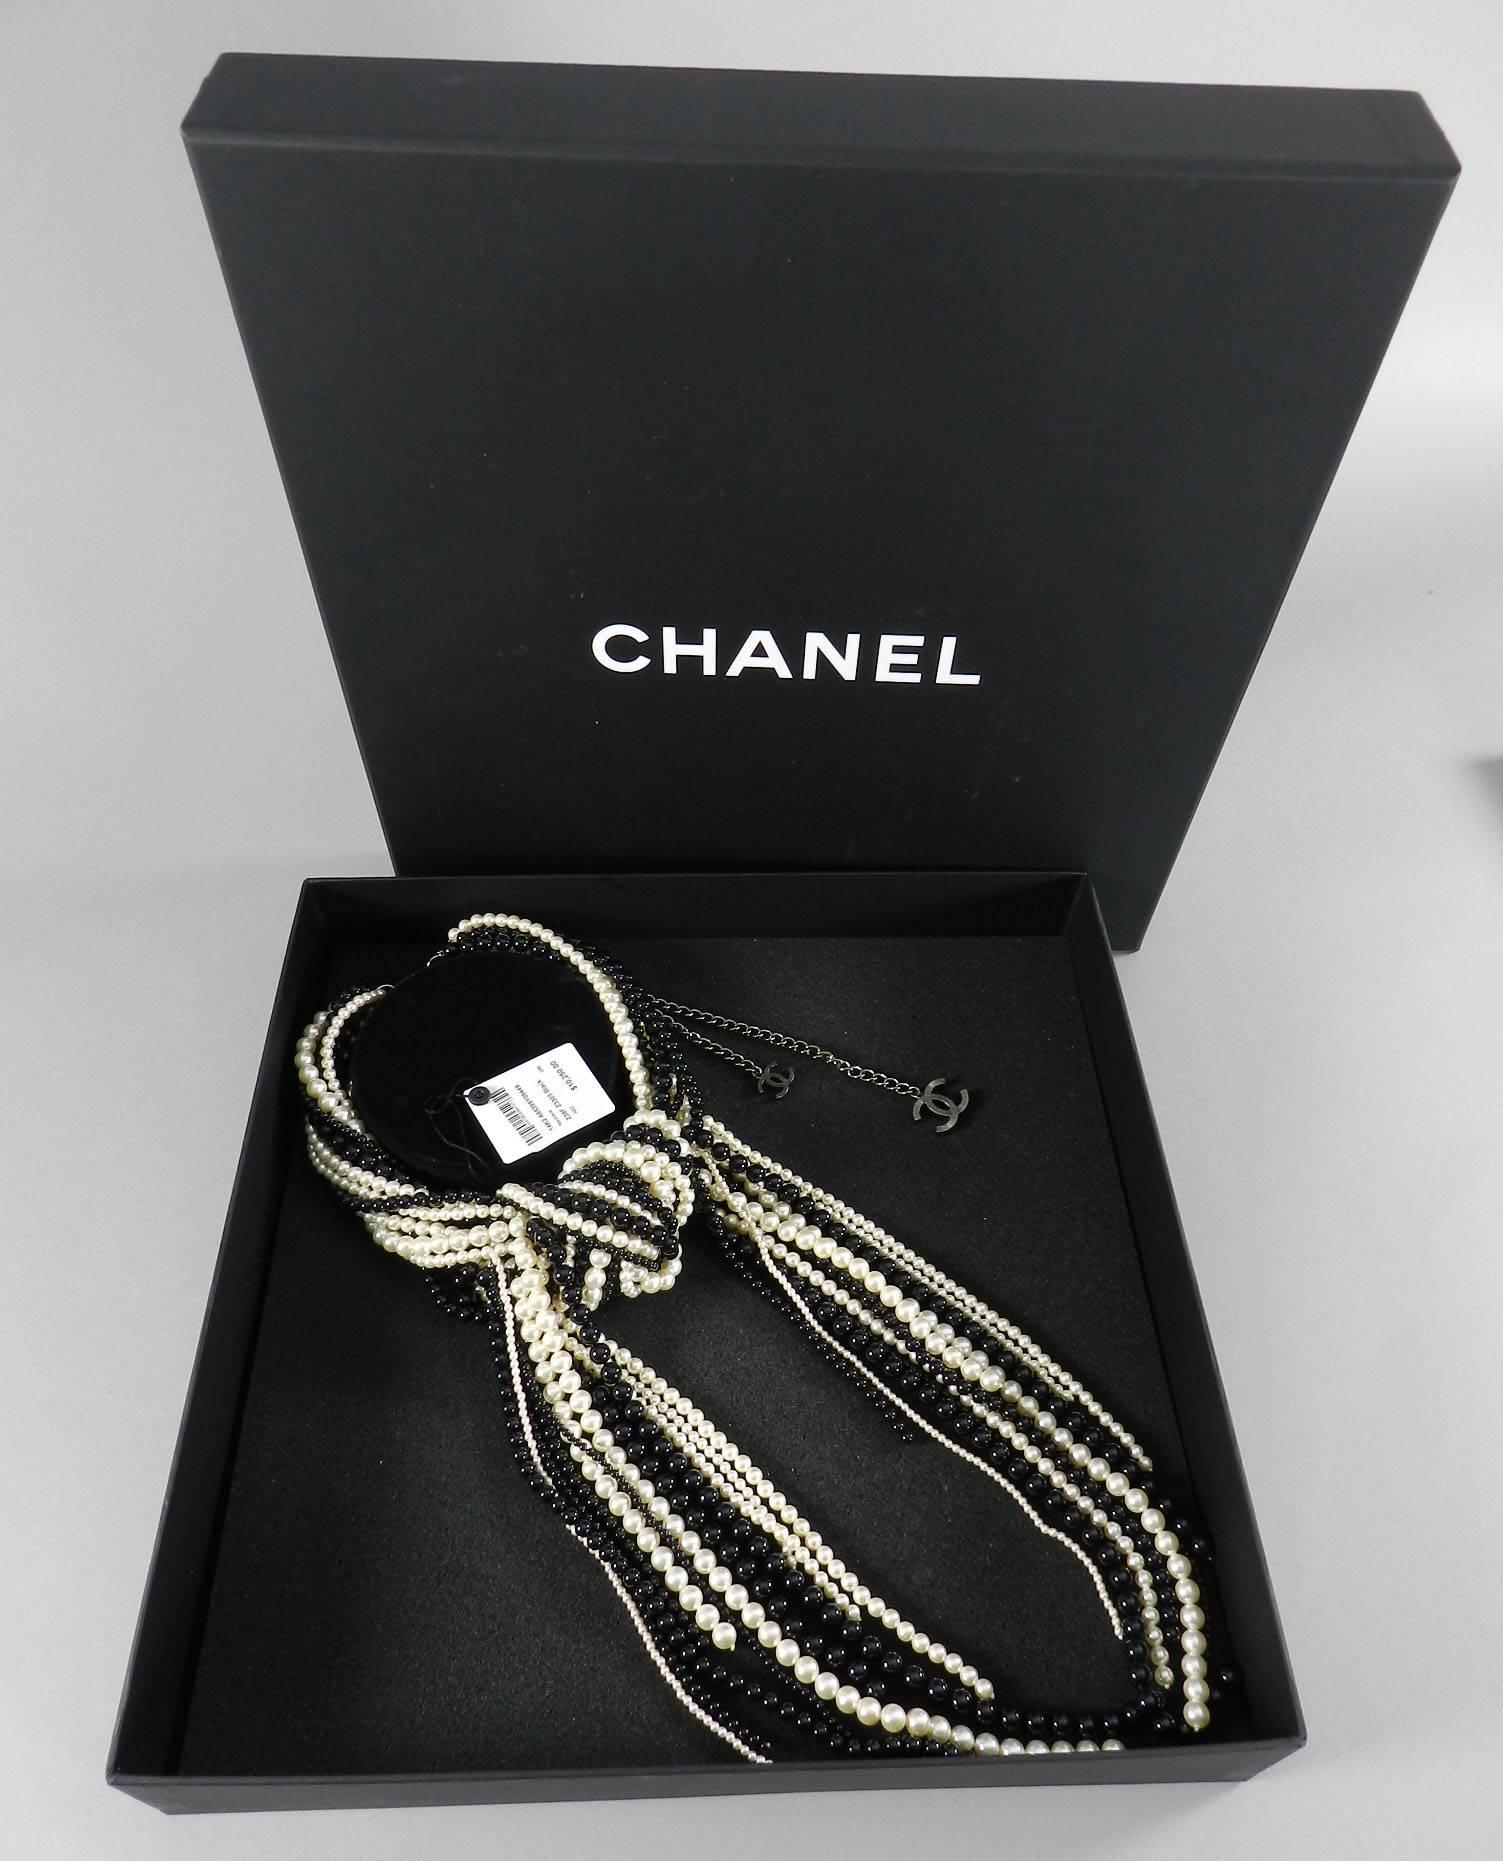 Chanel 2014 fall runway black and pearl bead knot necklace. Brand new in original box with price tag of $10,250+. Measures 15